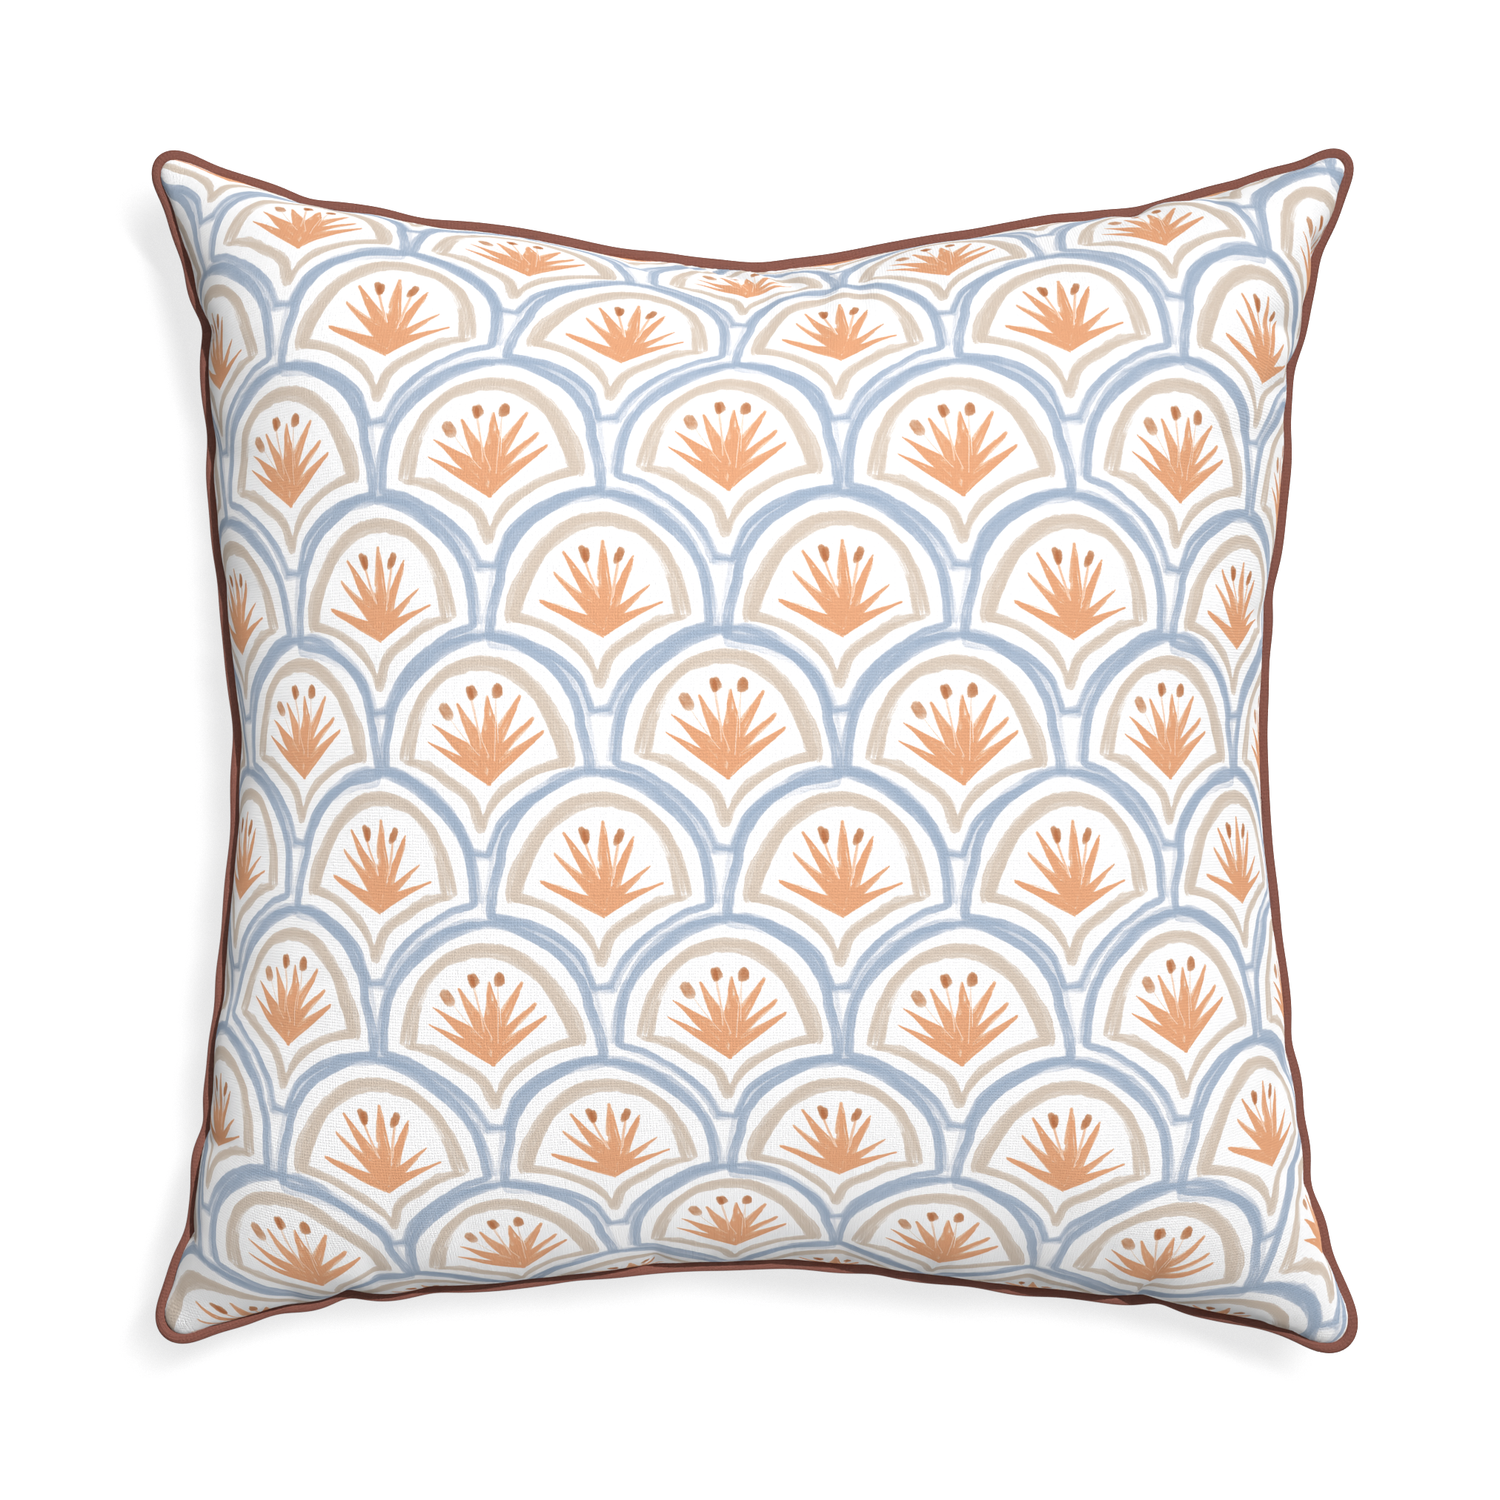 Euro-sham thatcher apricot custom art deco palm patternpillow with w piping on white background